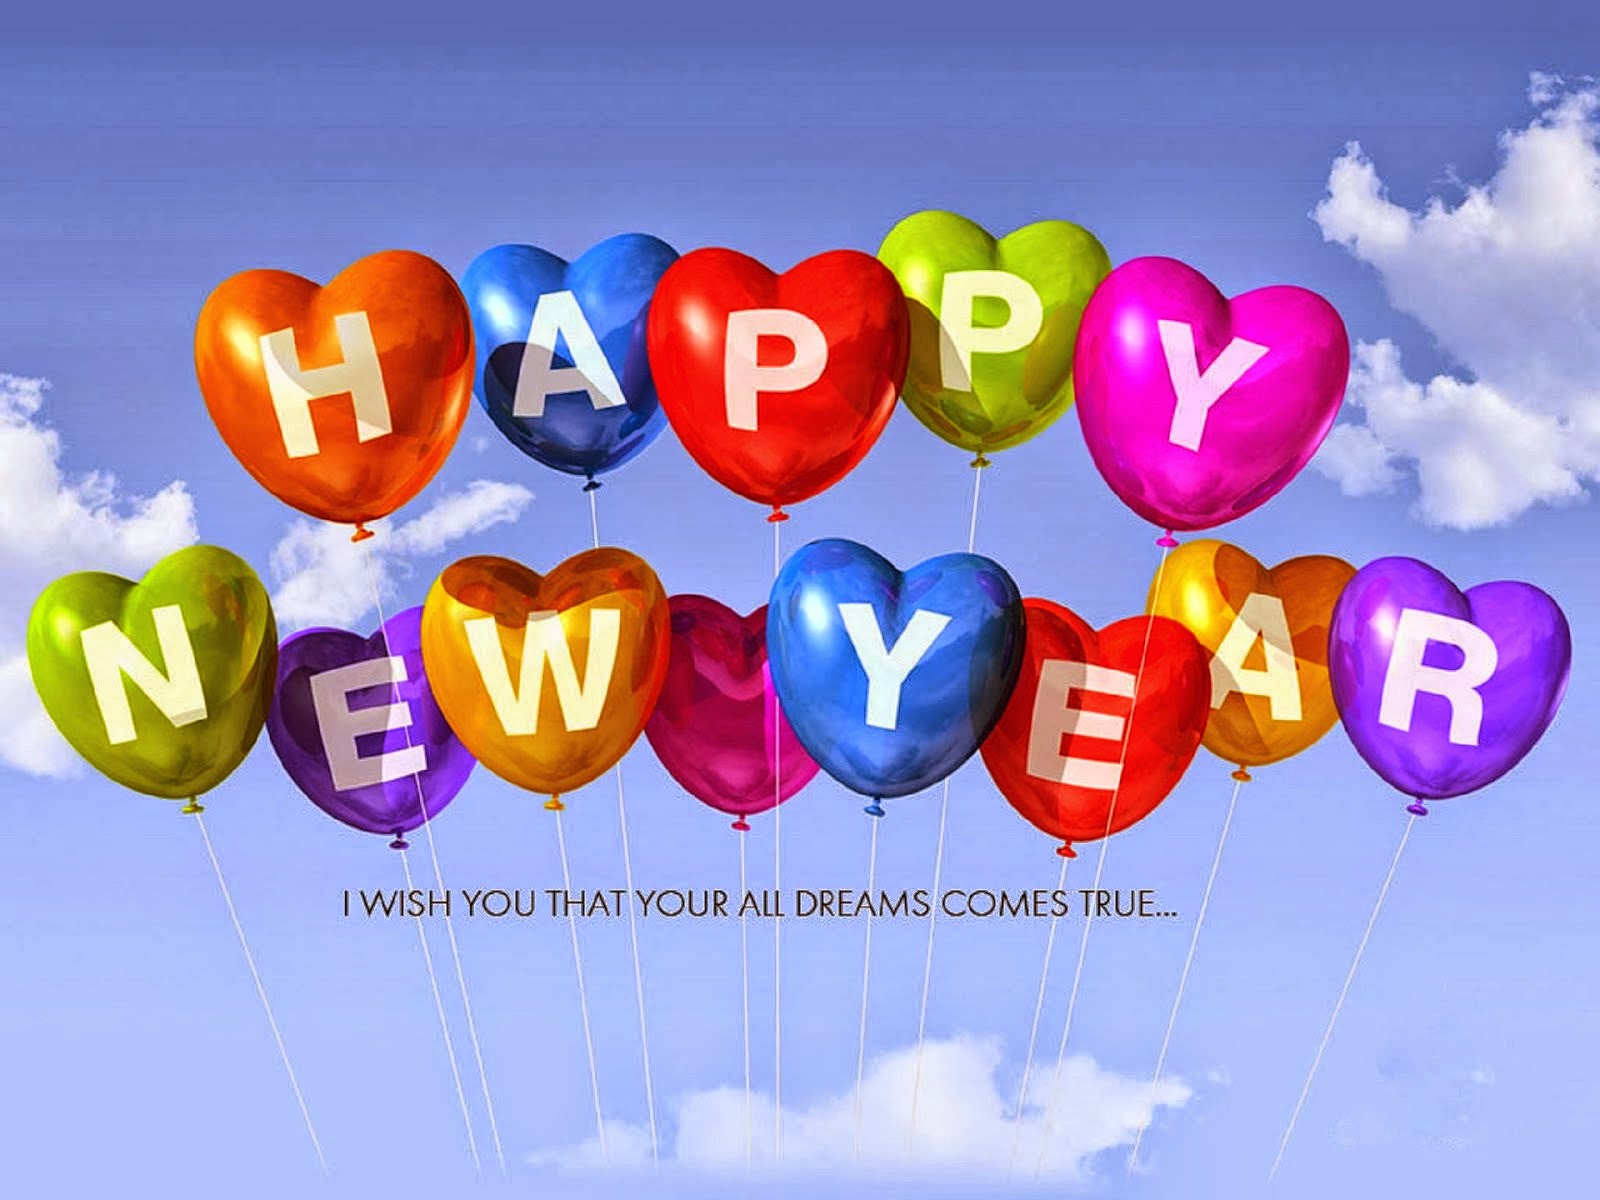 Best New Year Images 015 wallpaper